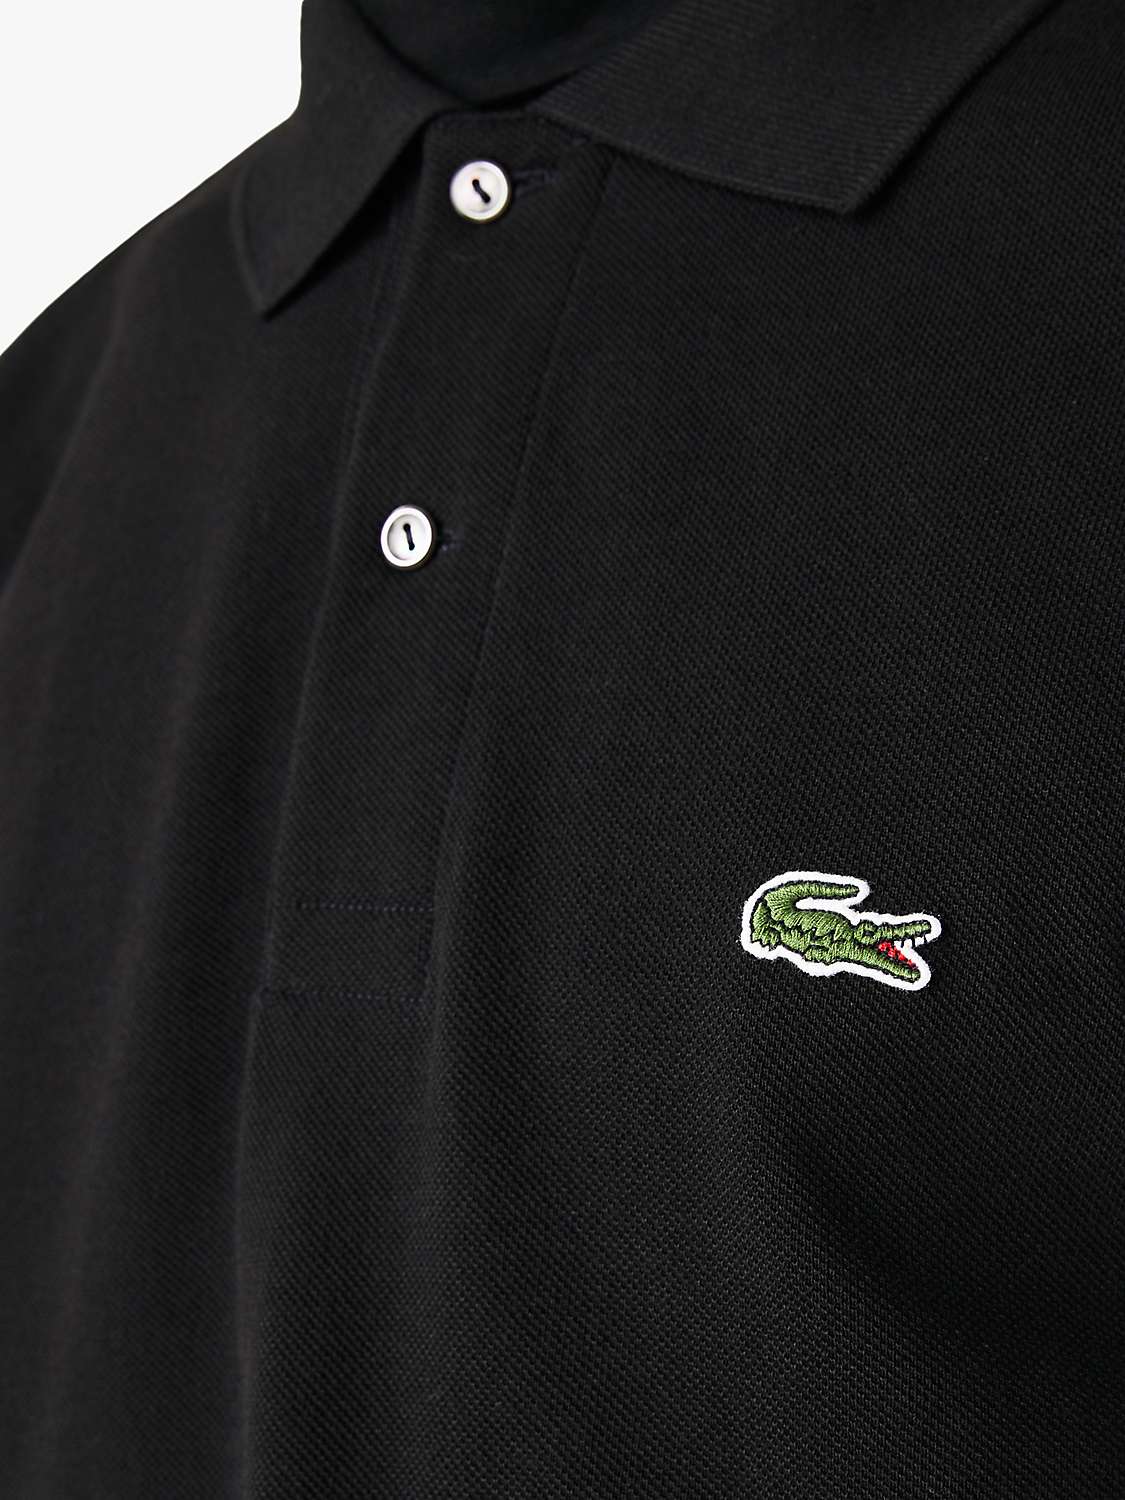 Lacoste L.12.12 Classic Regular Fit Short Sleeve Polo Shirt, Black at ...